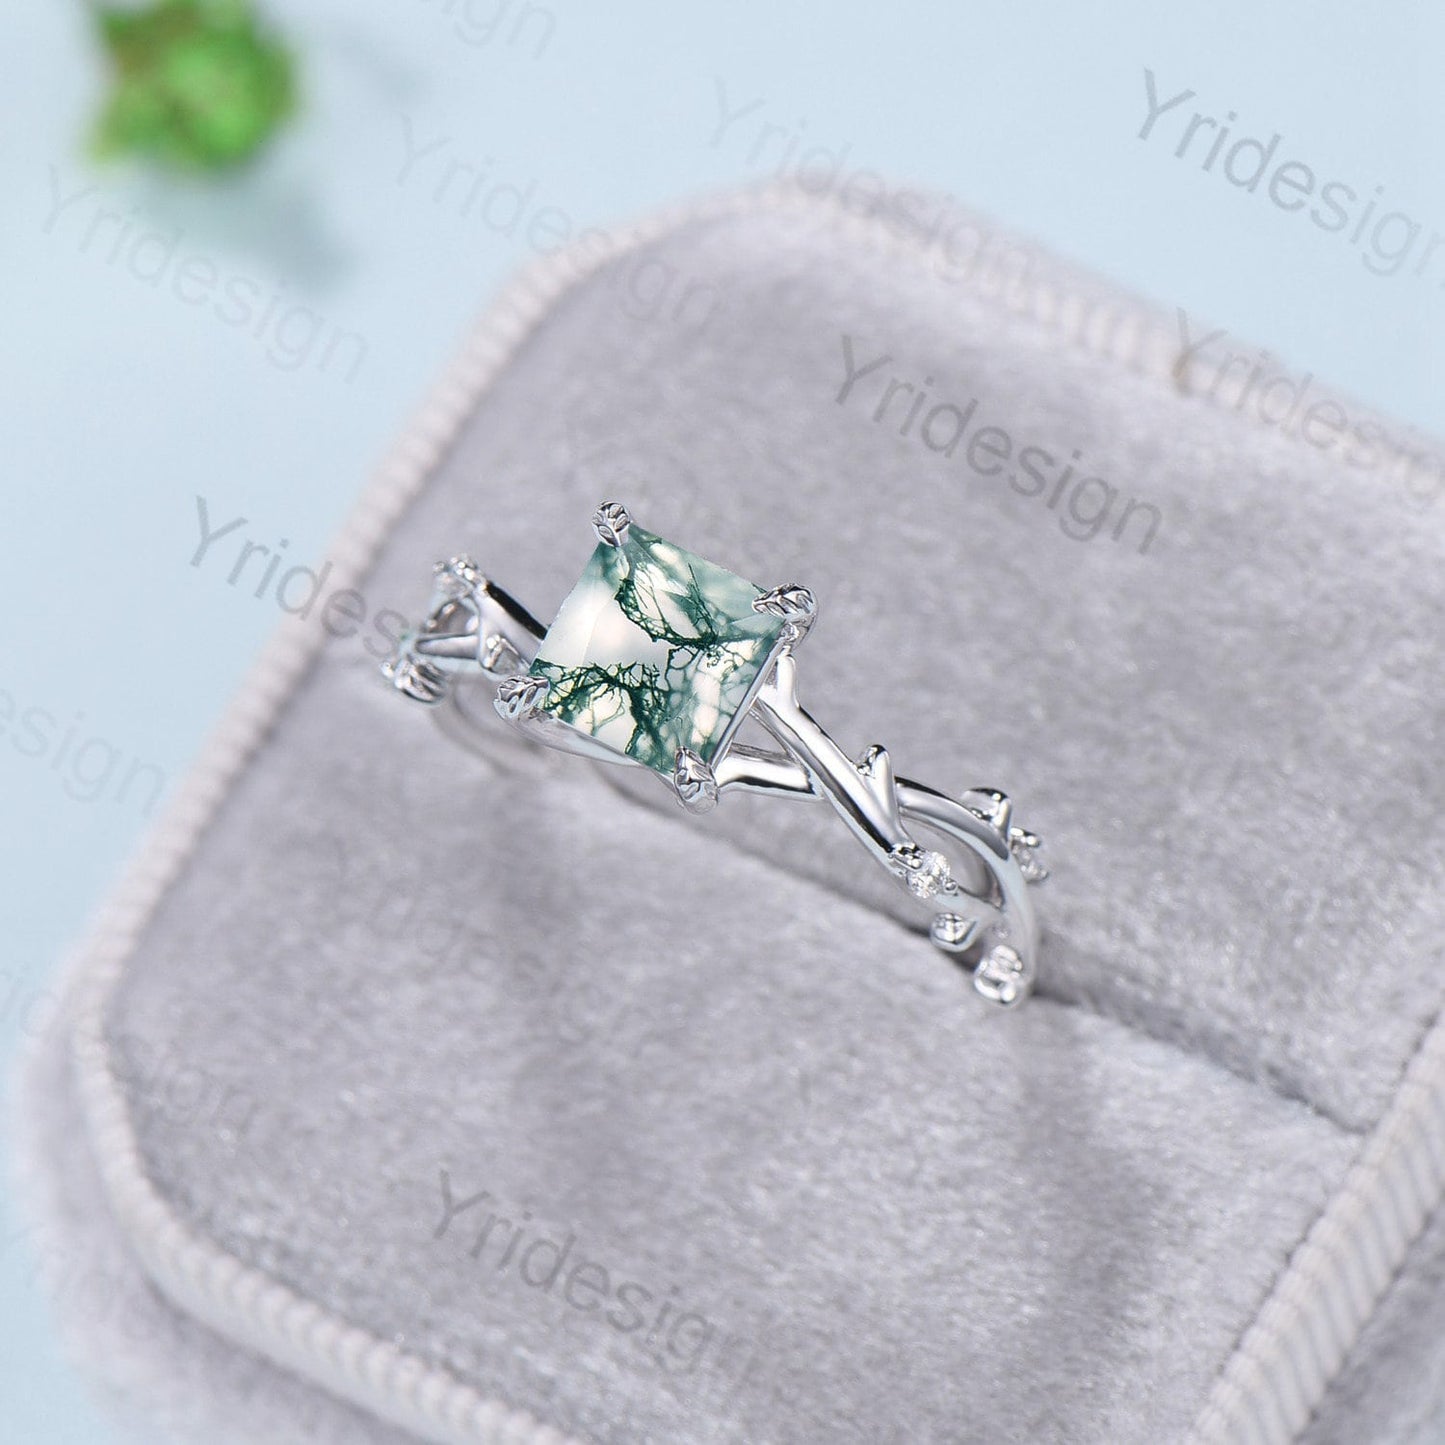 2CT Princess Cut Moss Agate Ring Twig Branch Green Crystal Engagement Ring Vintage Unique Leaves Natural Inspired Wedding Ring Gift For her - PENFINE